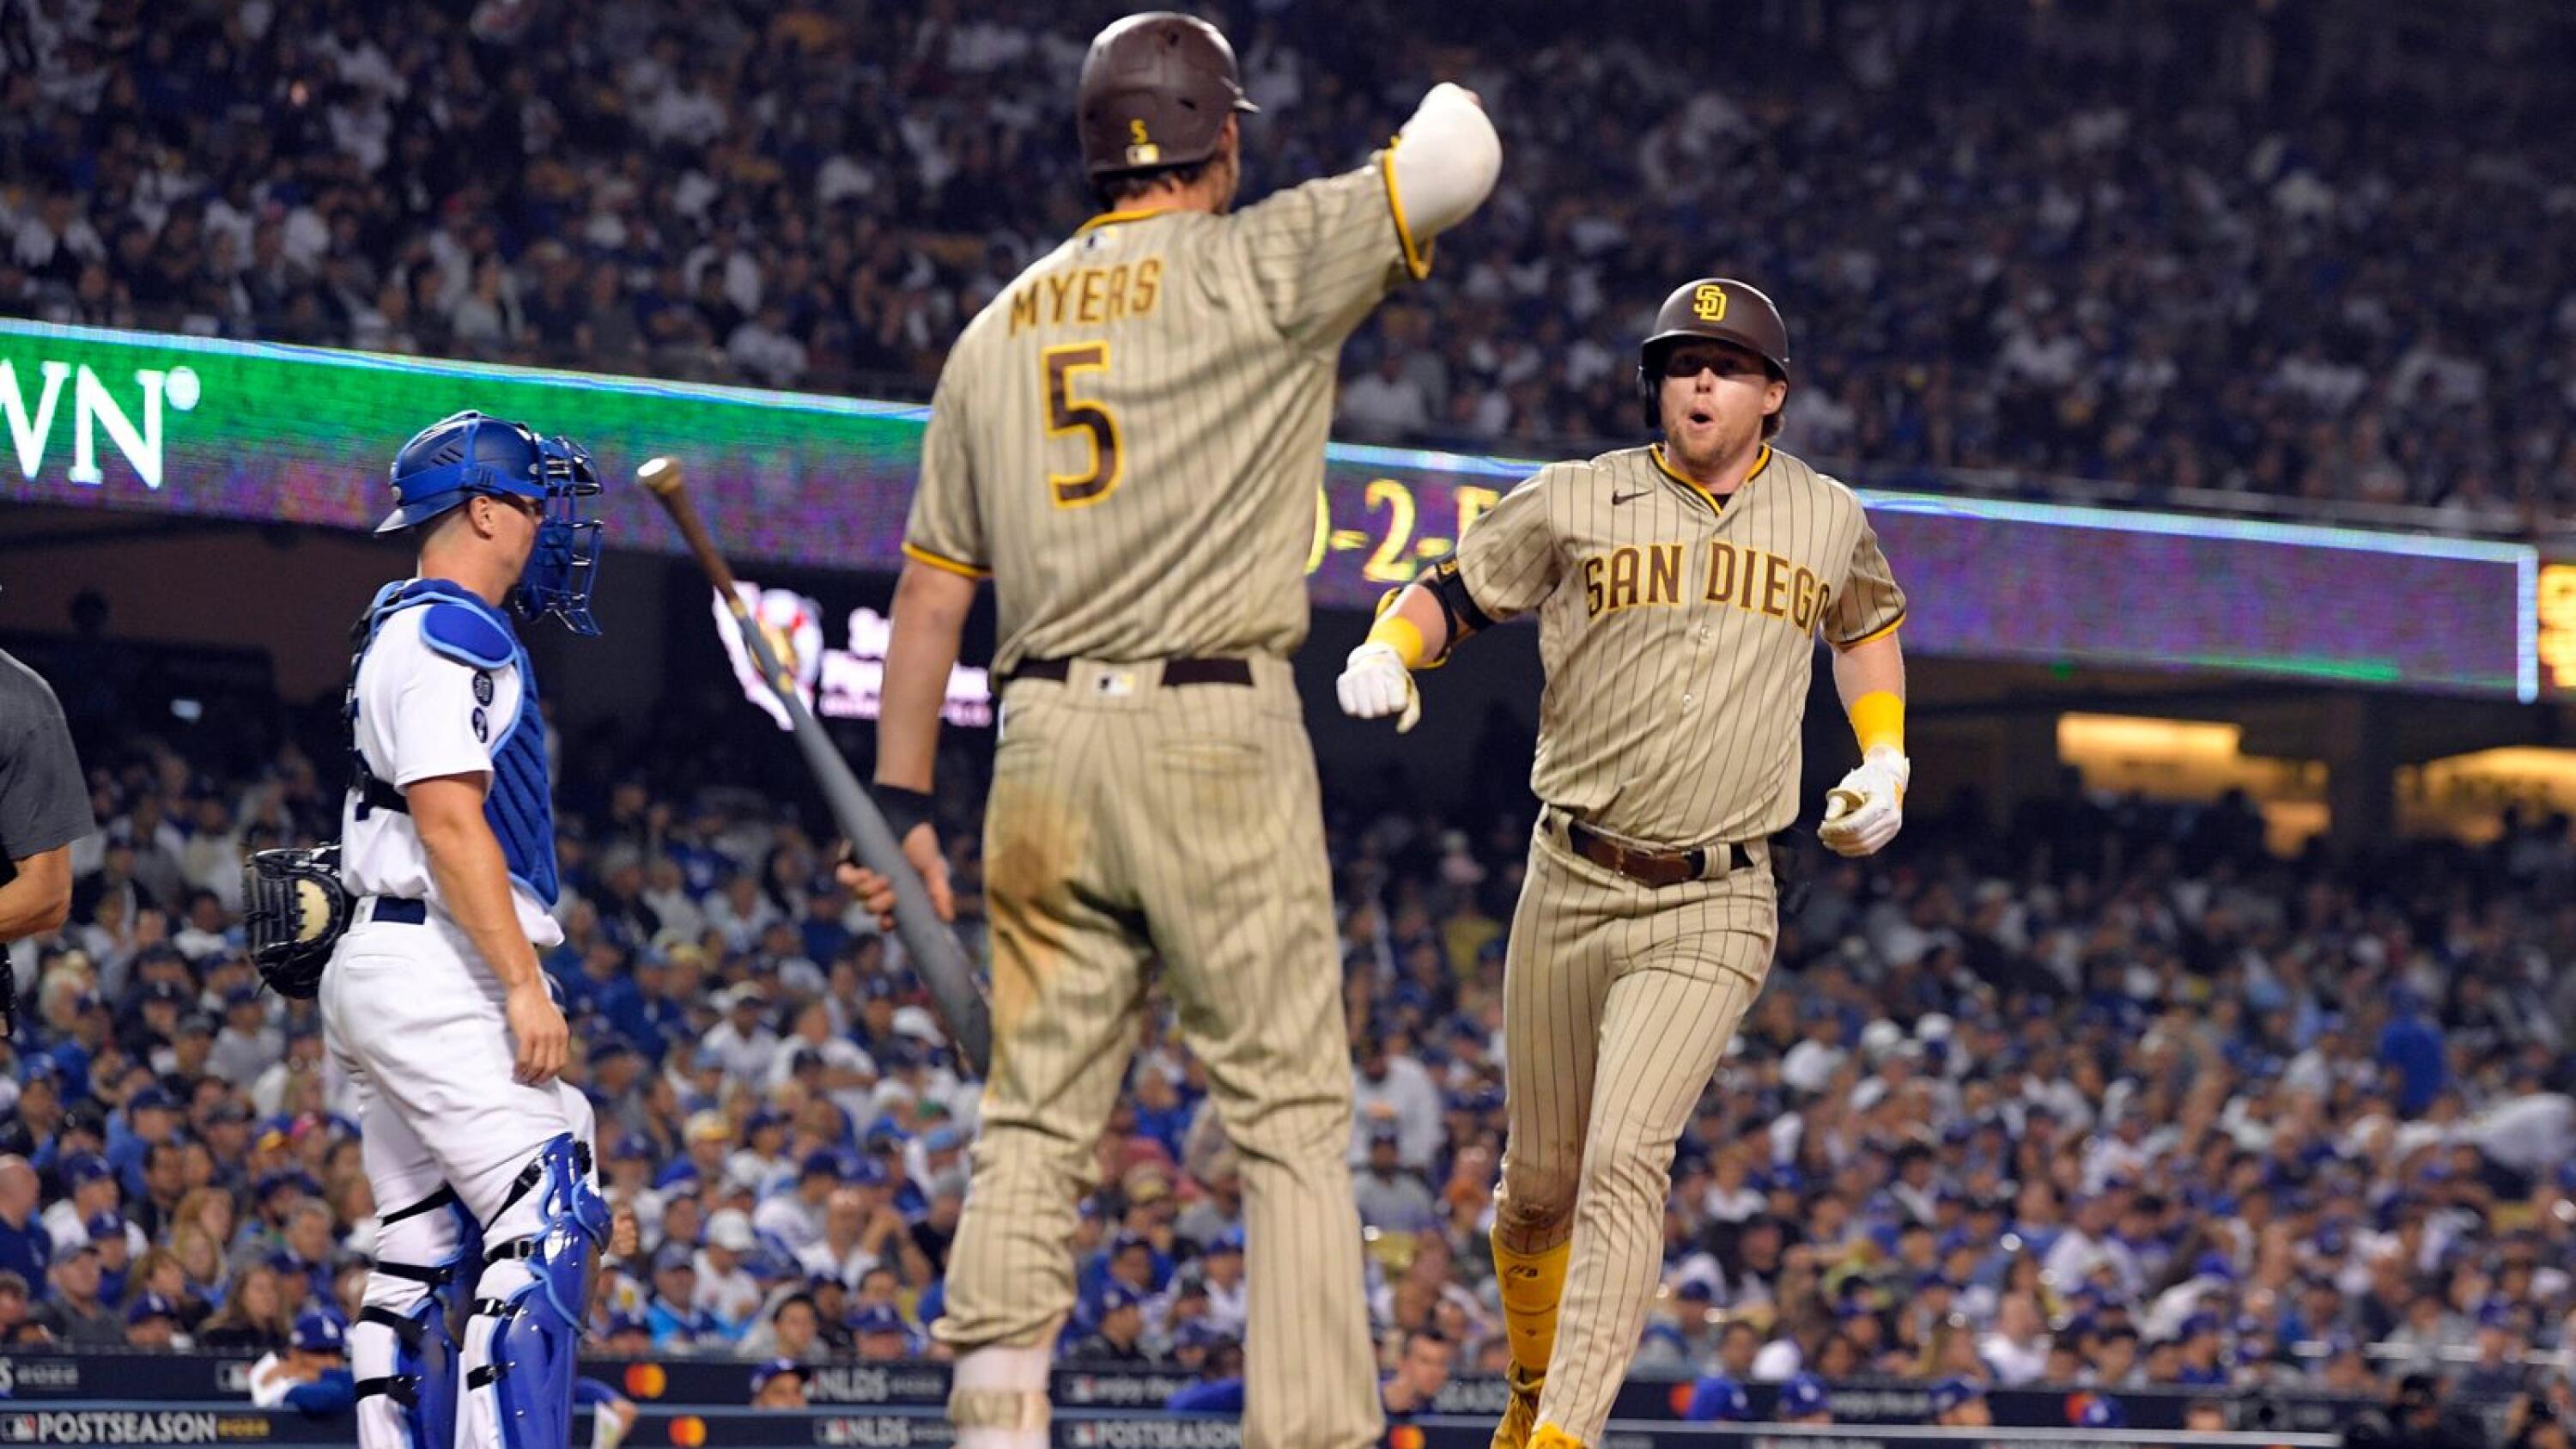 Dodgers lose NLDS to Padres, eliminated from 2022 postseason